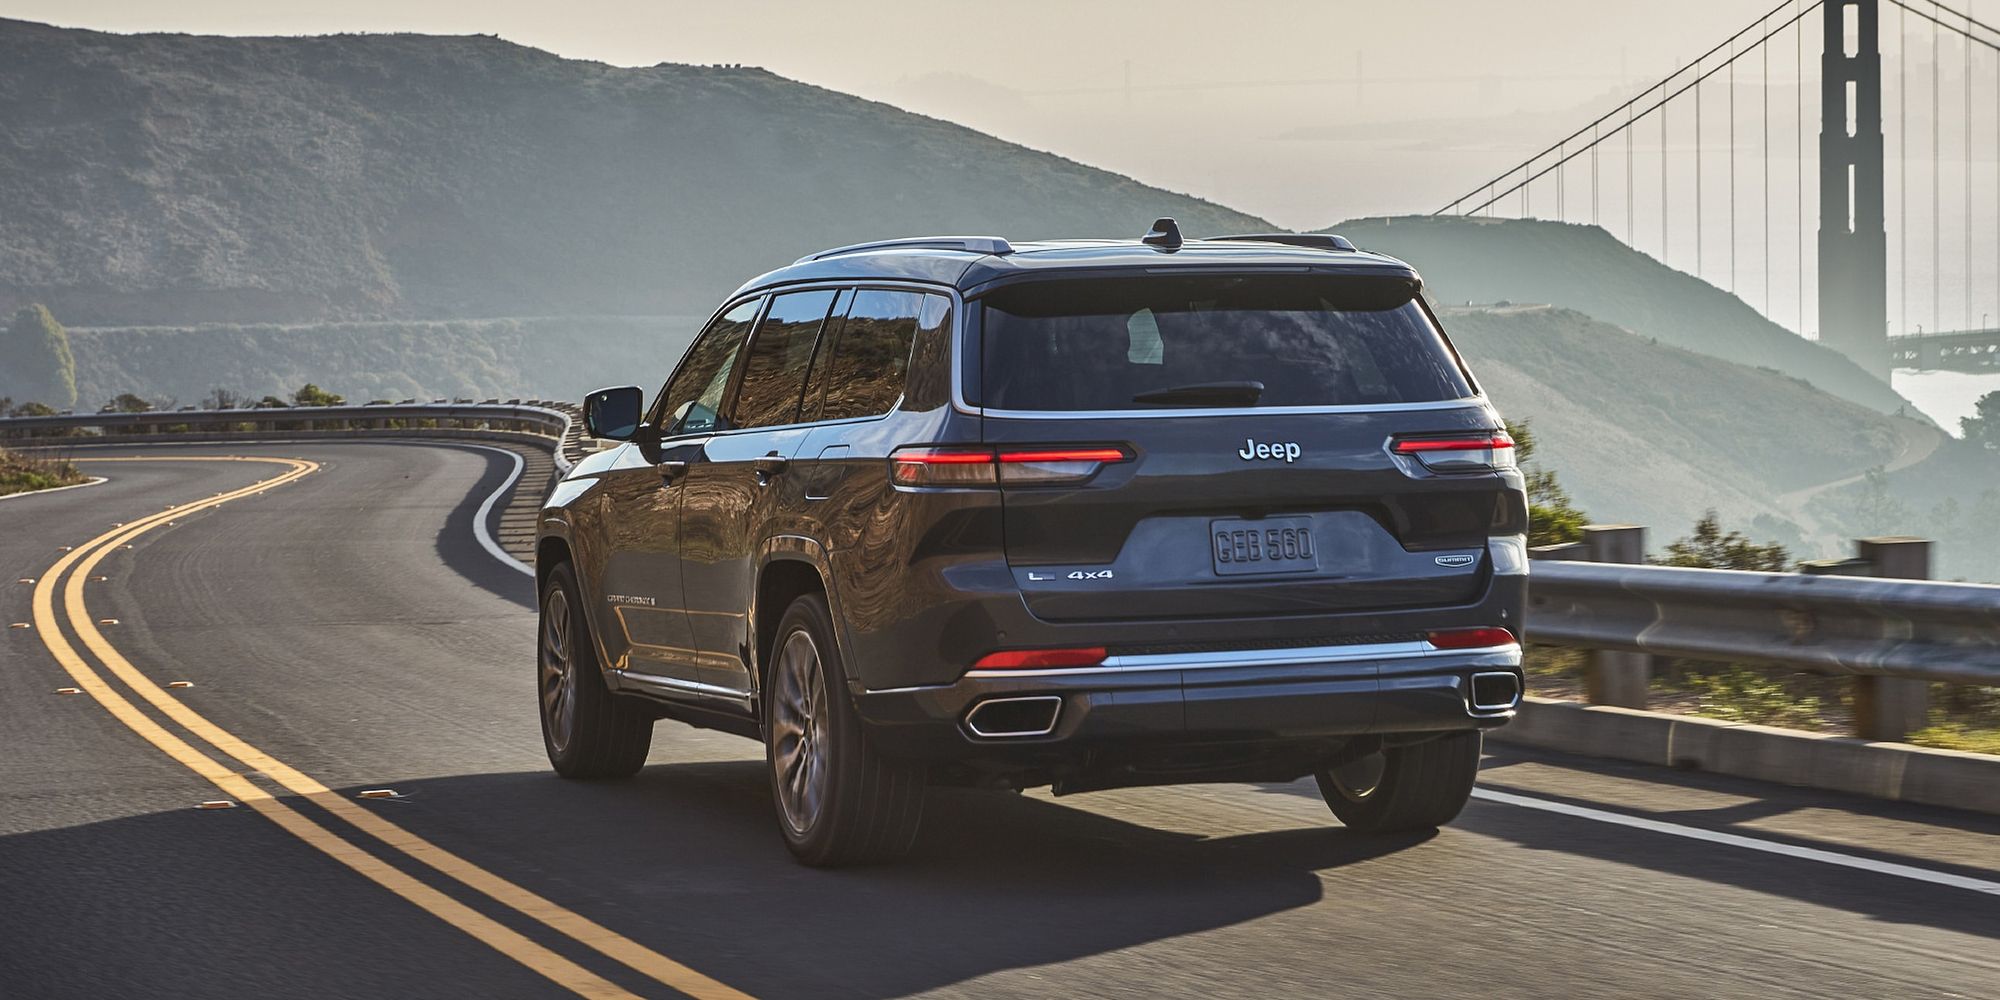 The rear of the new Grand Cherokee on the move